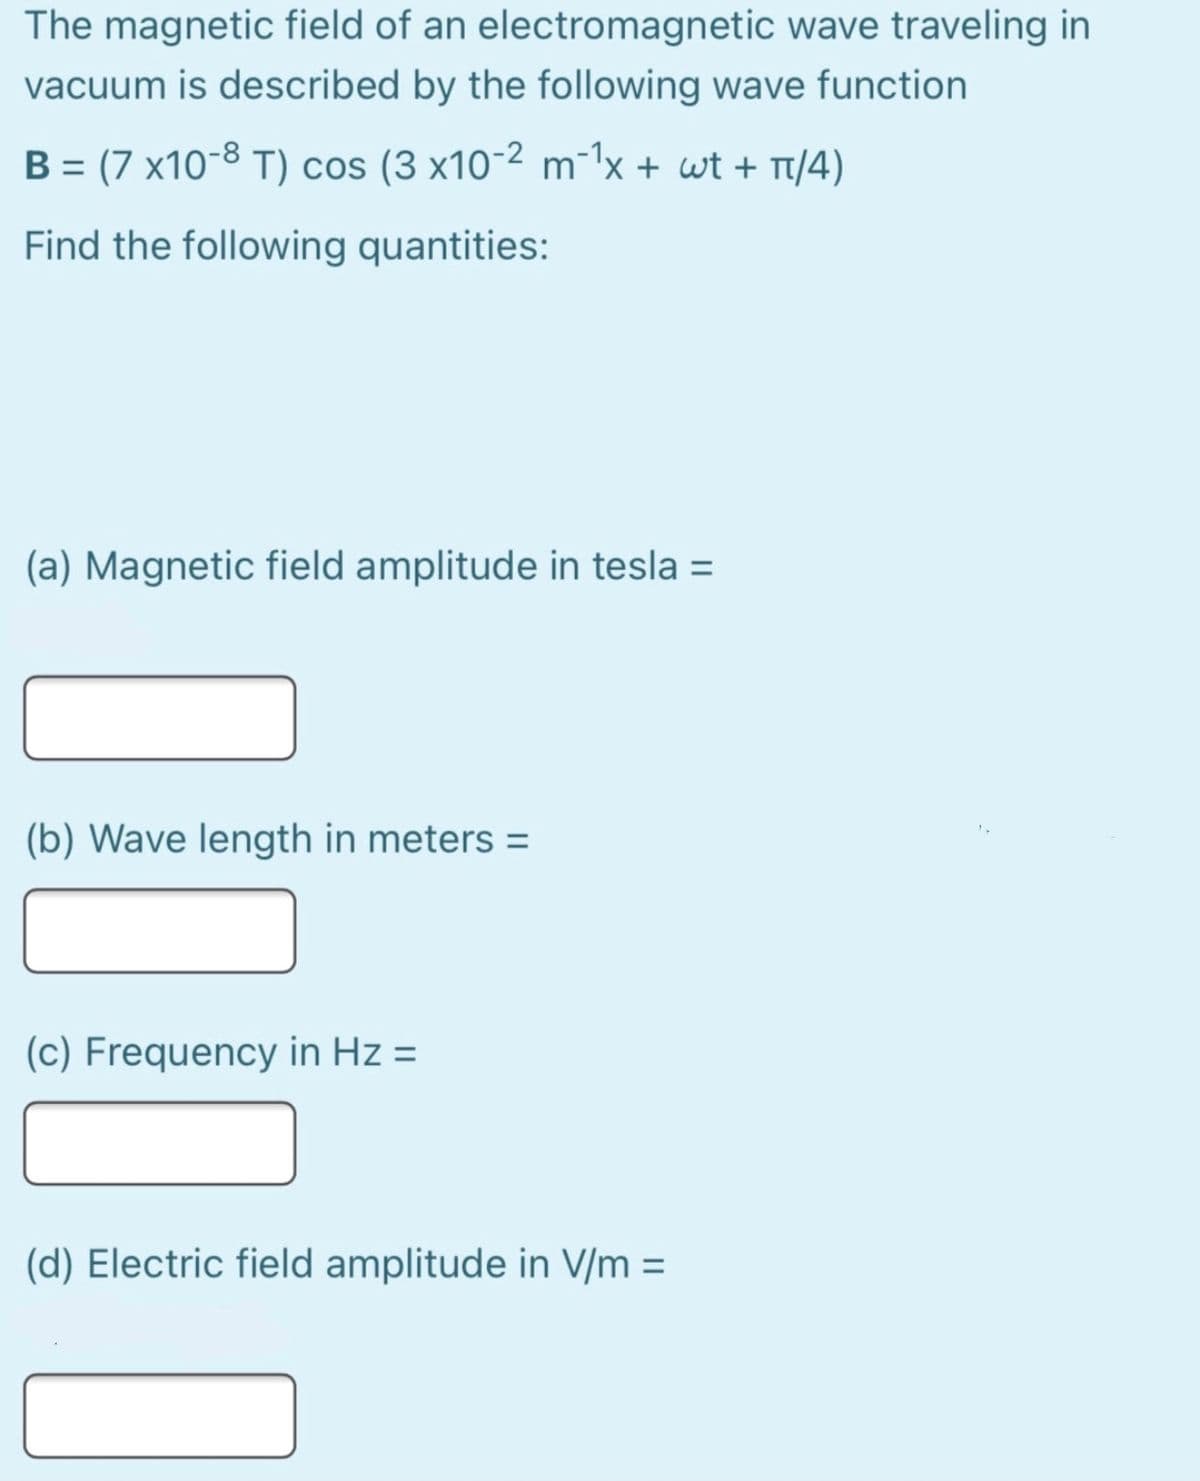 The magnetic field of an electromagnetic wave traveling in
vacuum is described by the following wave function
B = (7 x10-8 T) cos (3 x10-2 m-1x + wt + T/4)
%3D
Find the following quantities:
(a) Magnetic field amplitude in tesla =
(b) Wave length in meters =
(c) Frequency in Hz =
(d) Electric field amplitude in V/m =
